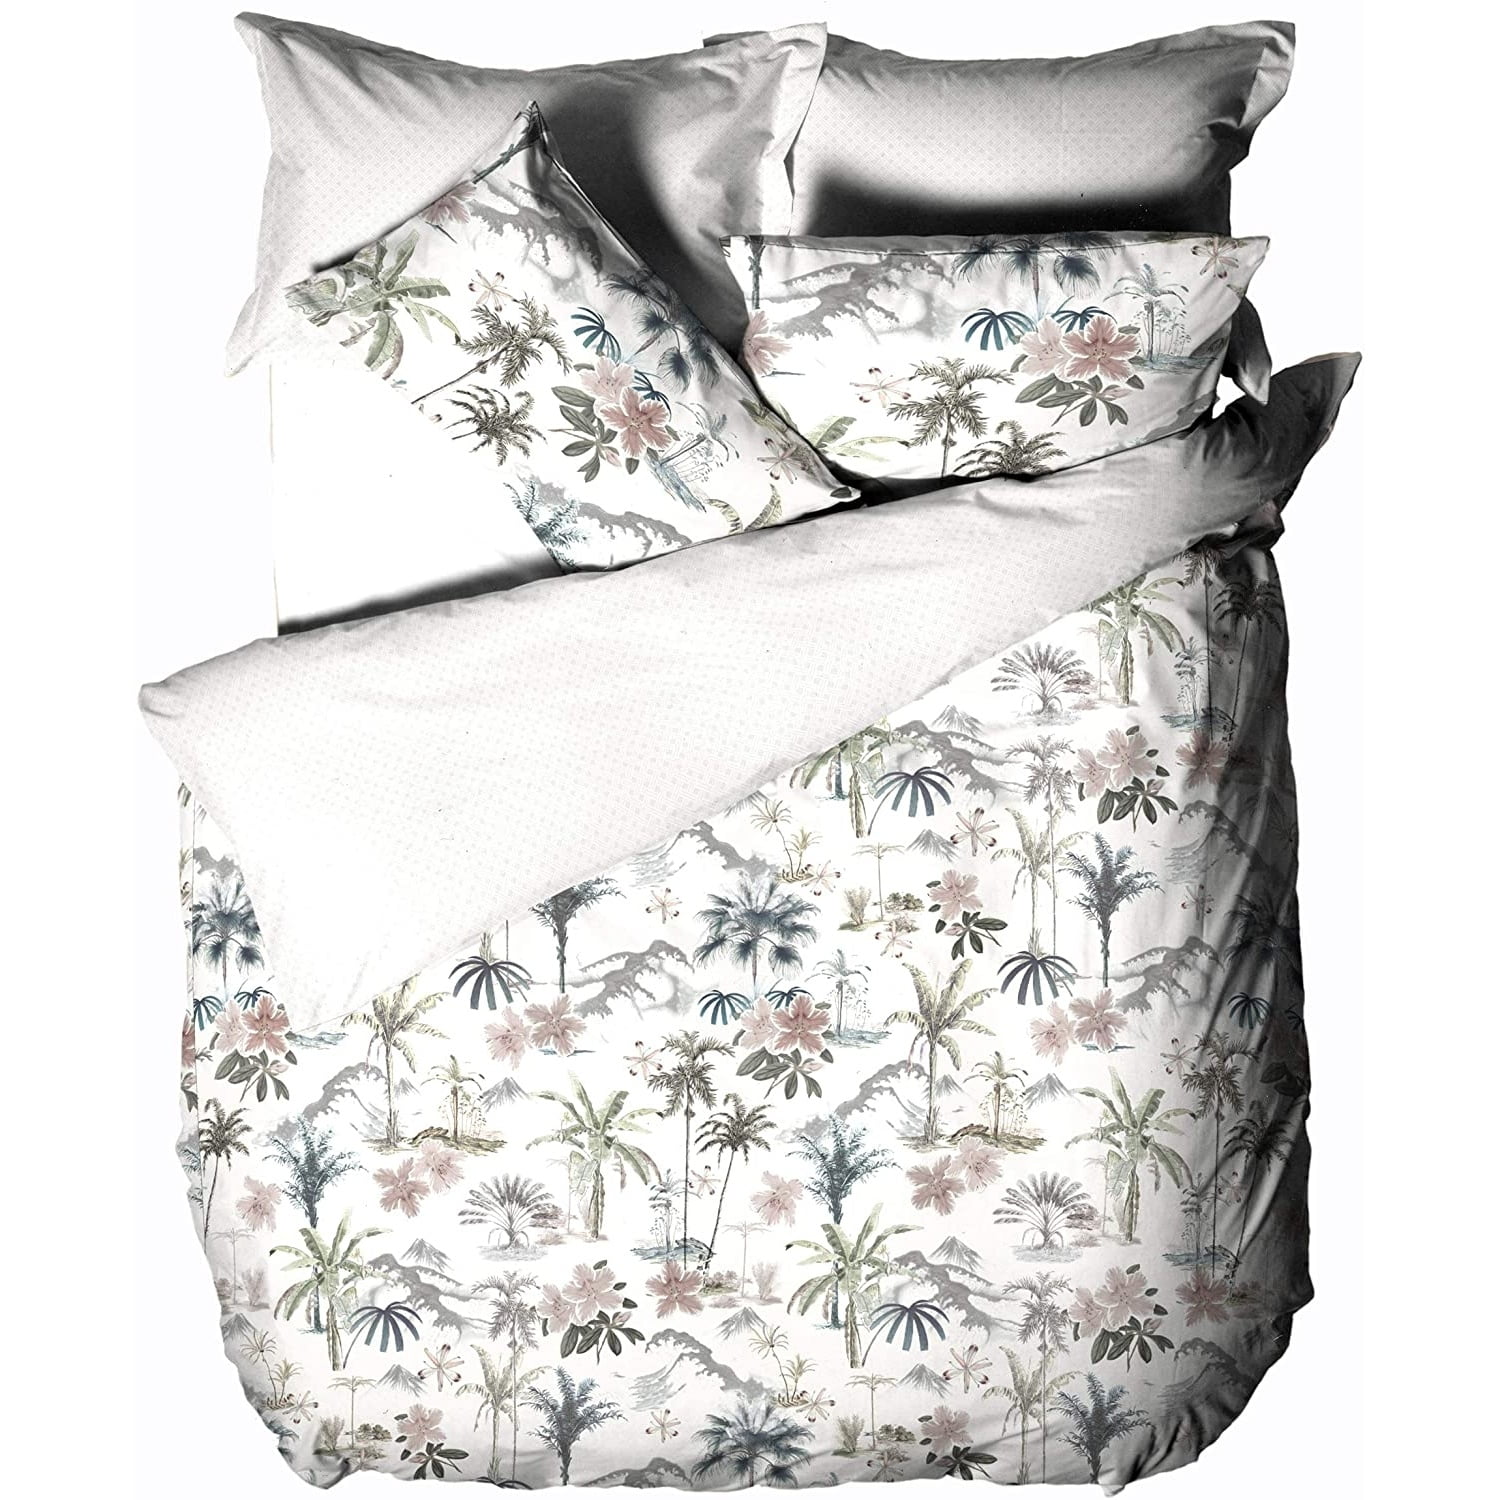 Green The Pillow Collection Luana Floral Pillow 